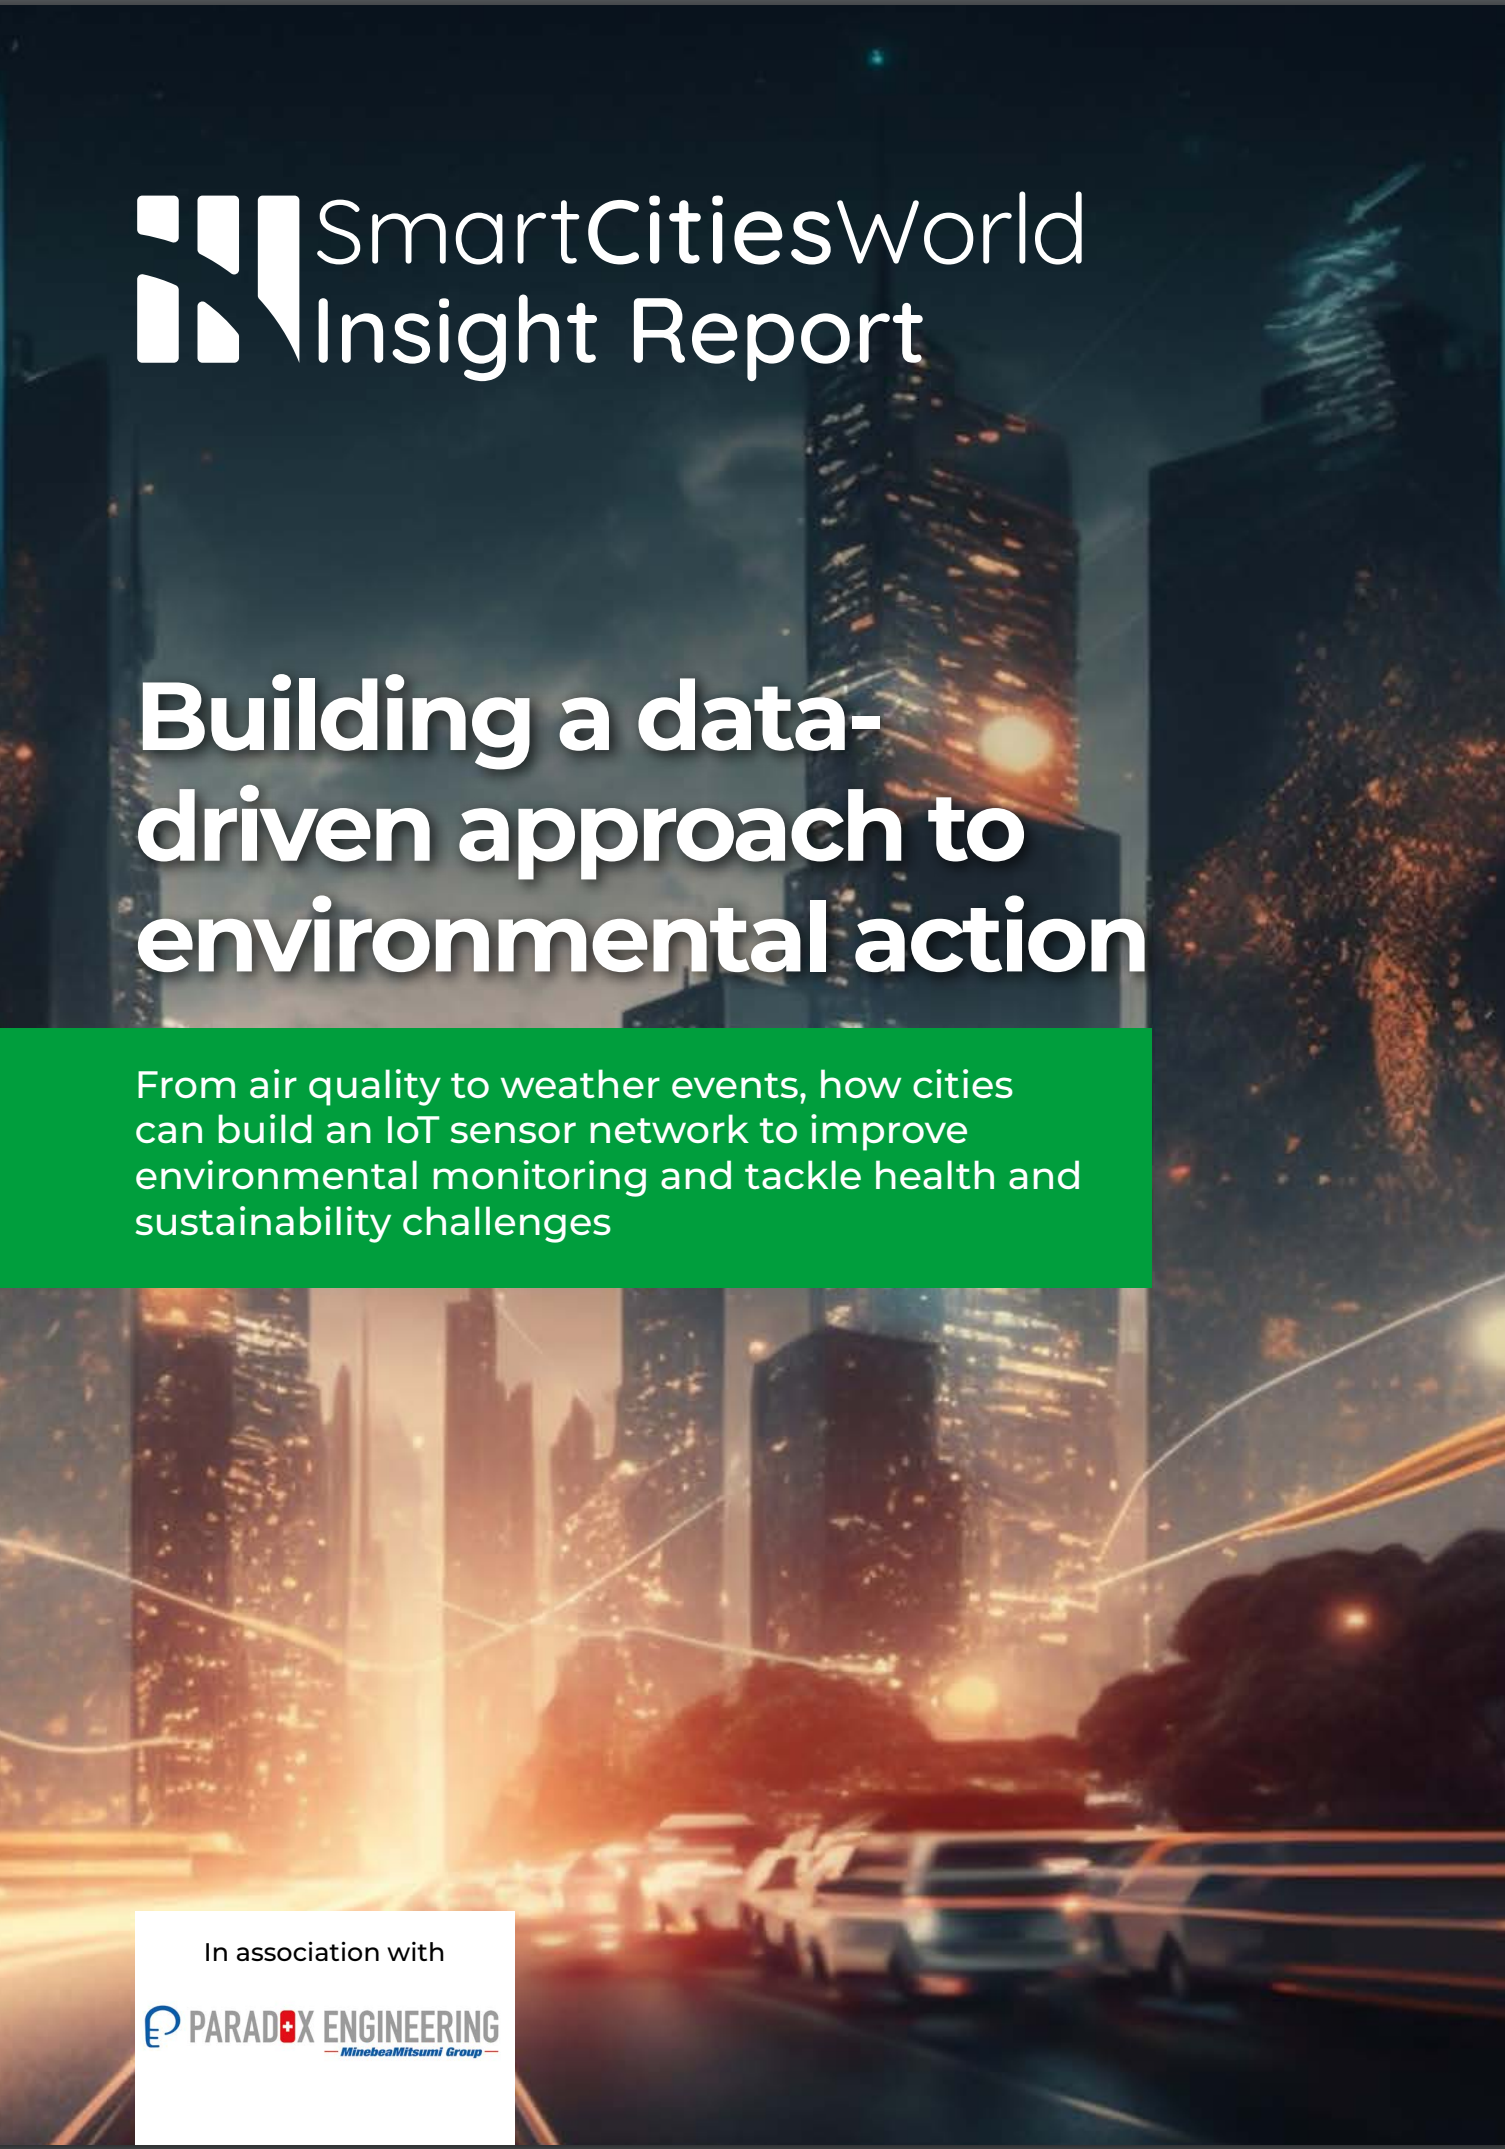 Insight Report: Building a data-driven approach to environmental action